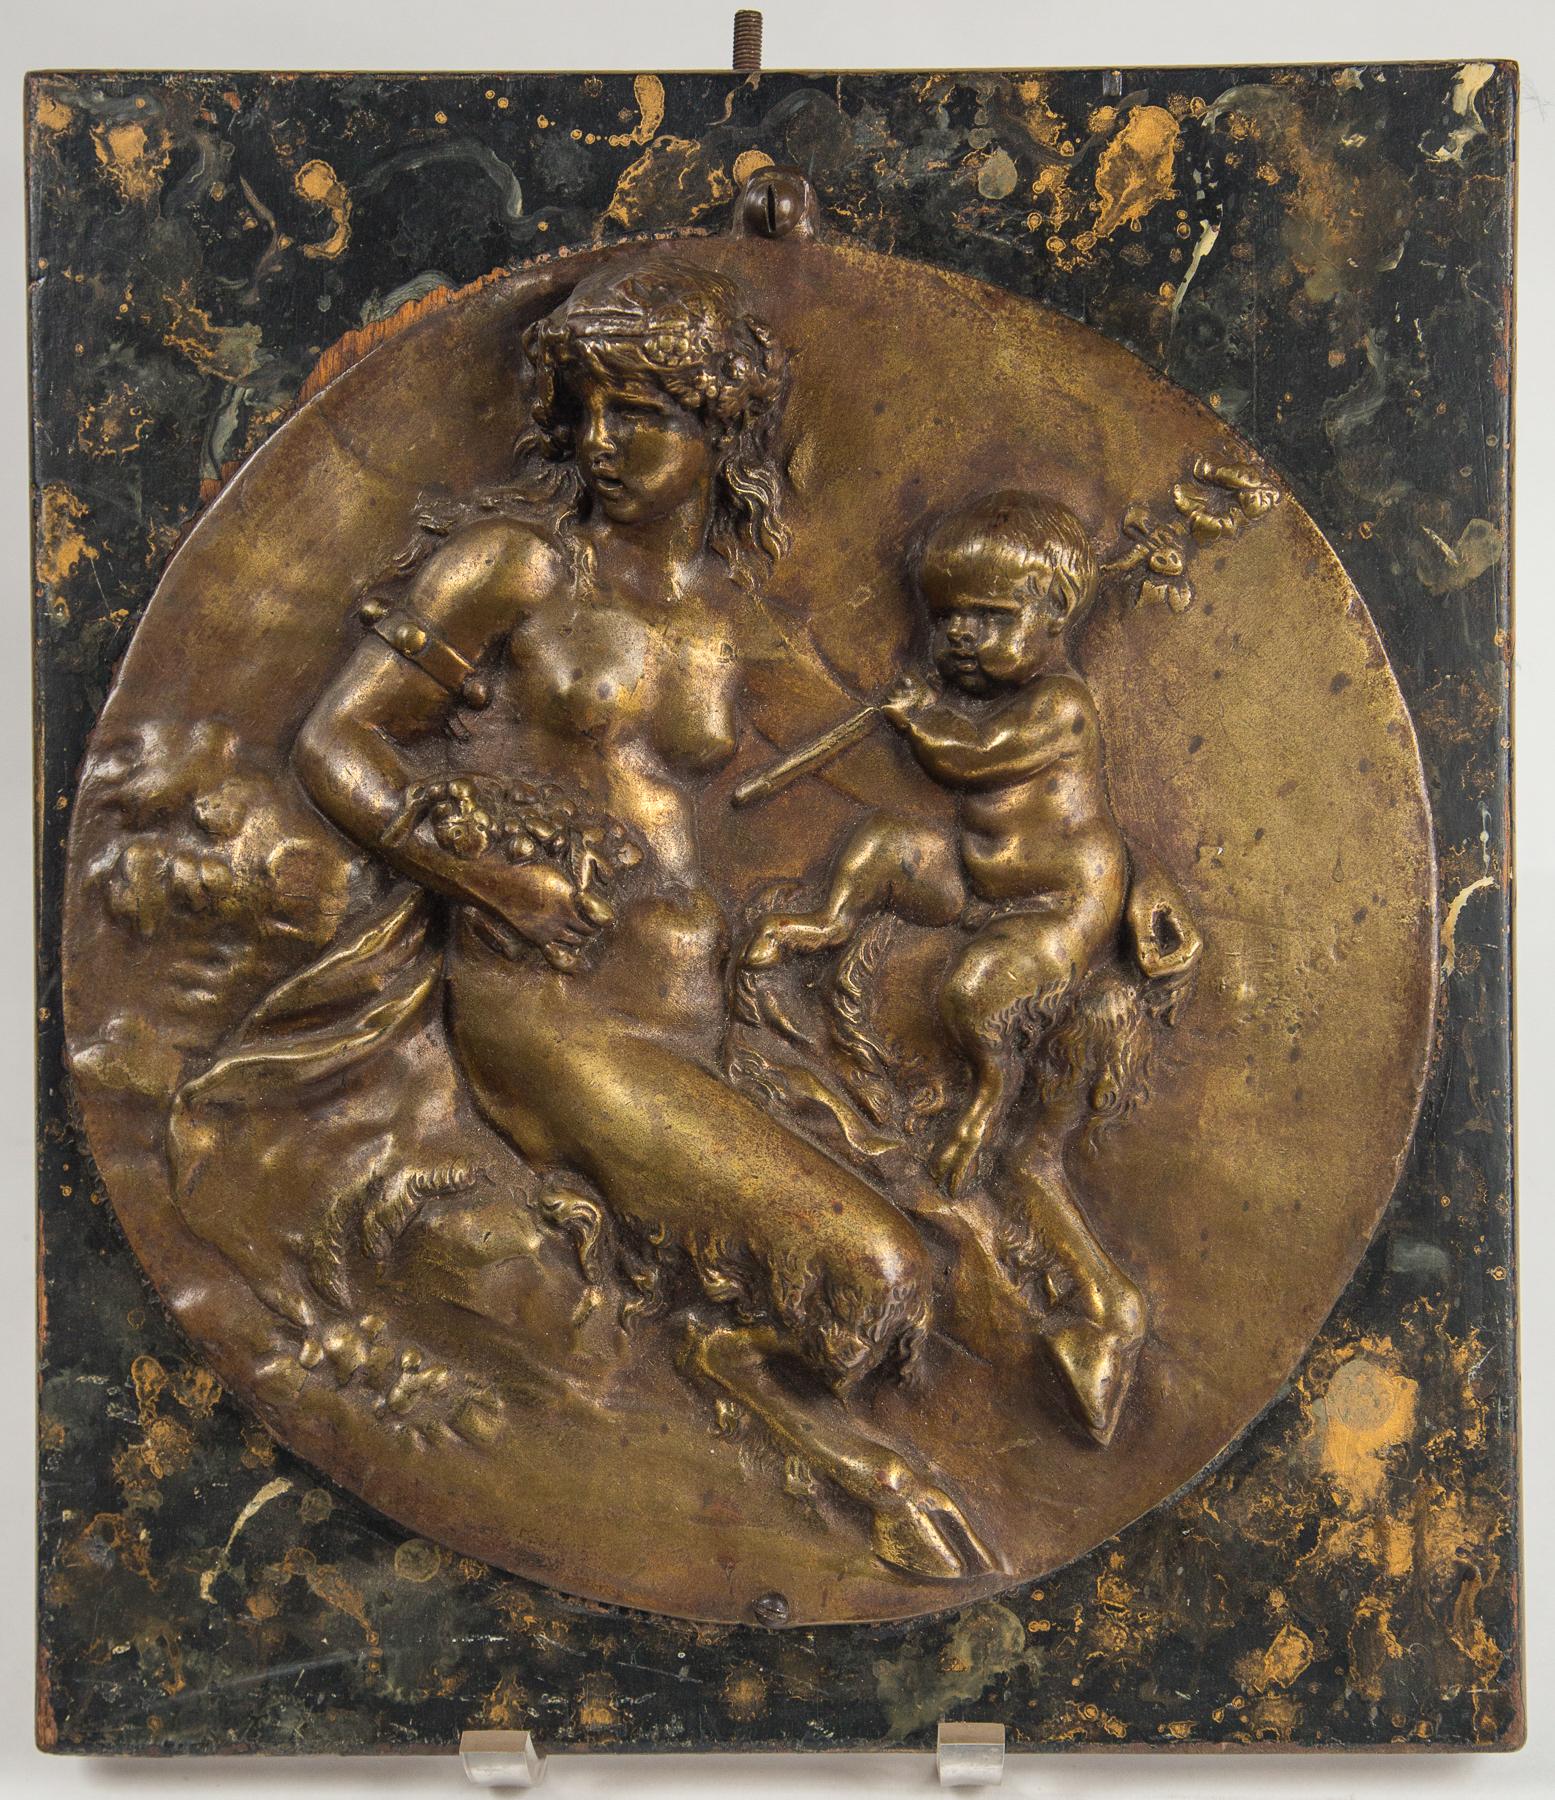 The plaque is attached, with screws, top and bottom, to a faux marble painted piece of wood measuring 13.5 x 12 x 1. This plaque depicts a female and child satyr. They each have hoofed feet. It seems to be finished in dark gold tone lacquer on the